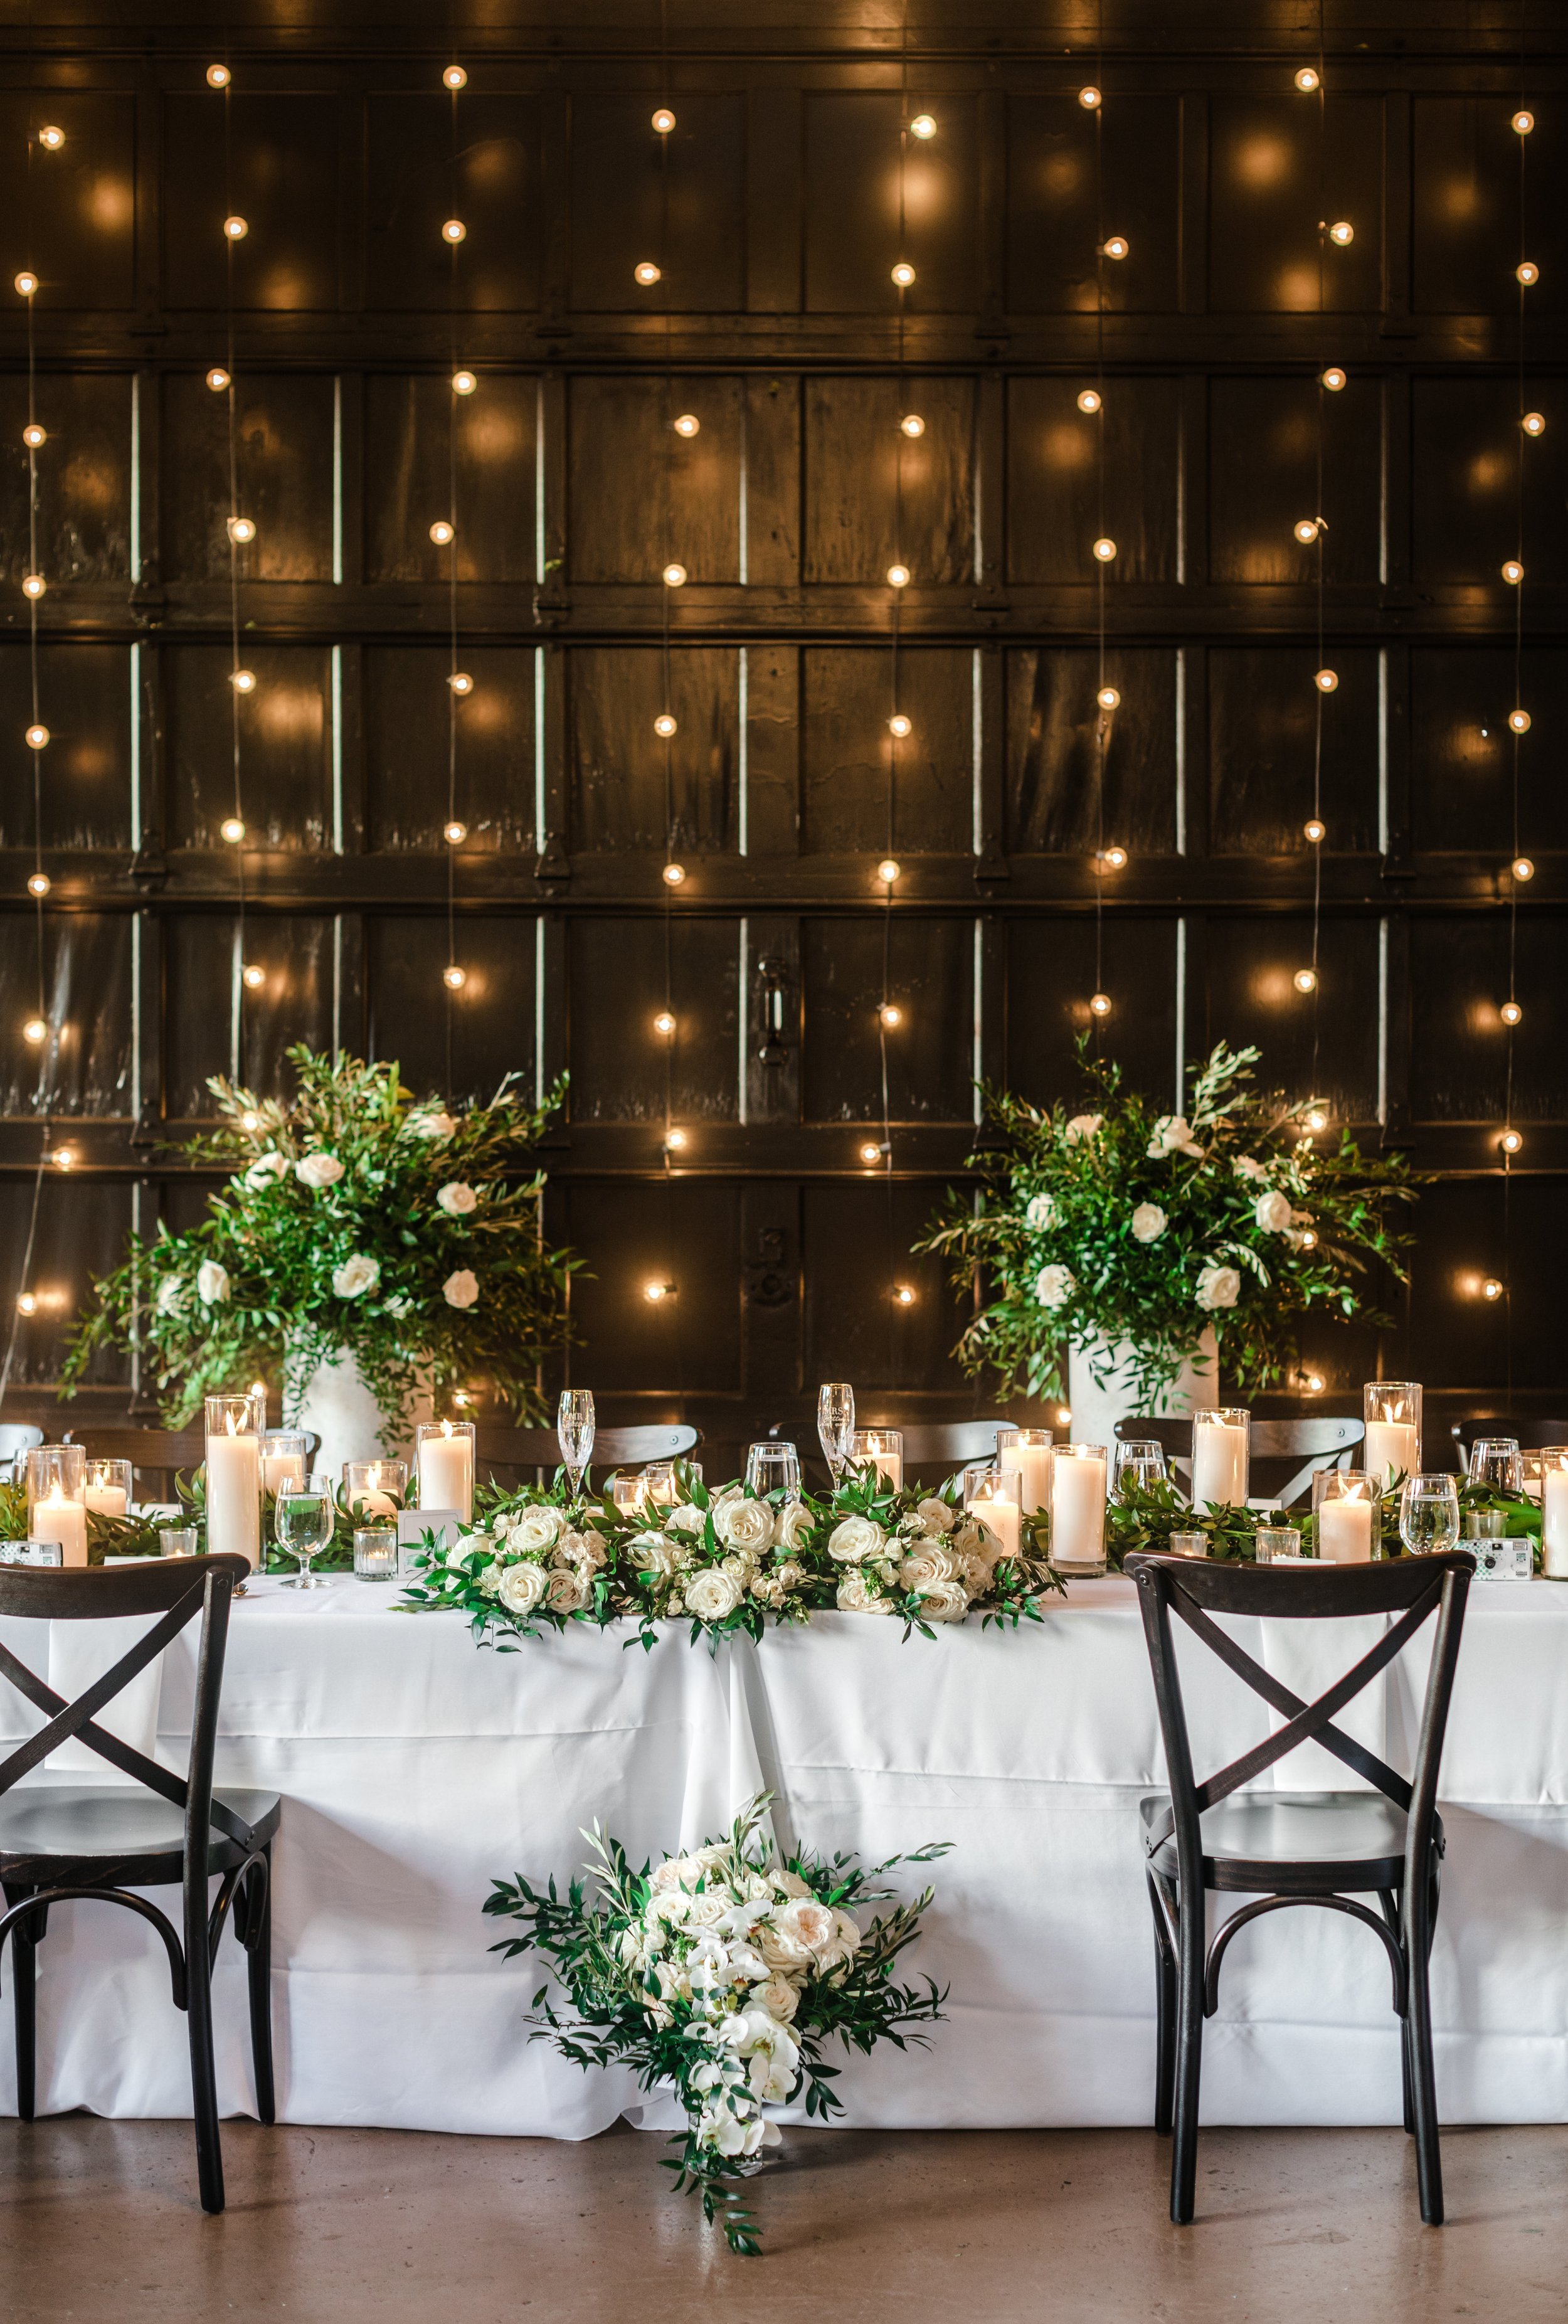 ivory-and-beau-wedding-and-florals-annelise-and-preston-wedding-blog-savannah-wedding-savannah-wedding-coordinator-savannah-florsit-wedding-florist-southern-wedding-forsyth-park-fountain-soho-south-savannah-wedding-gmp201993452-150.jpg